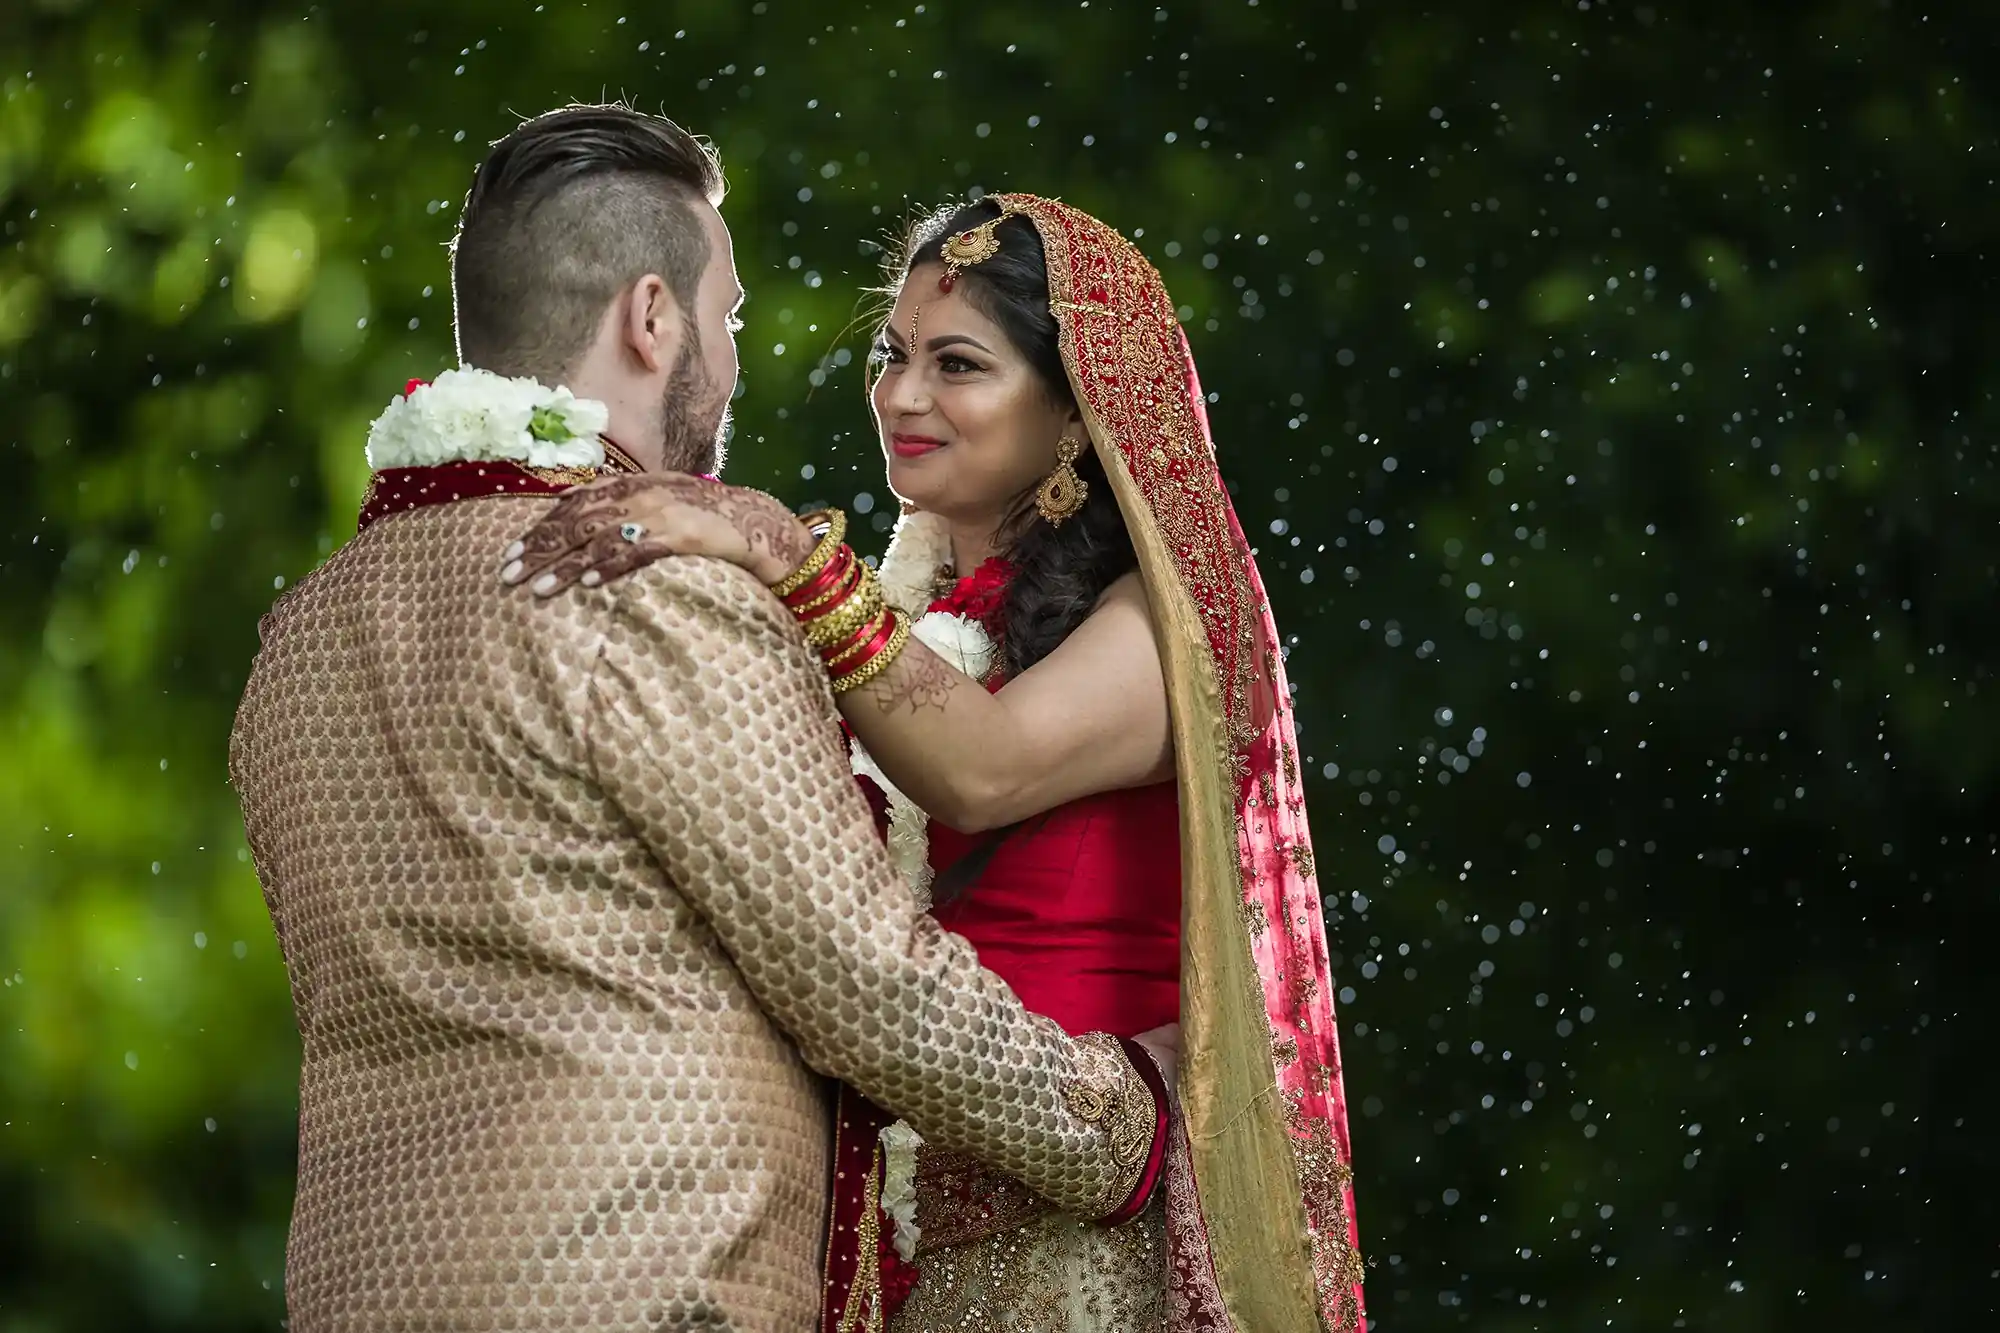 A bride in a red saree and groom in a beige sherwani share a moment under a sprinkle of raindrops, surrounded by greenery.